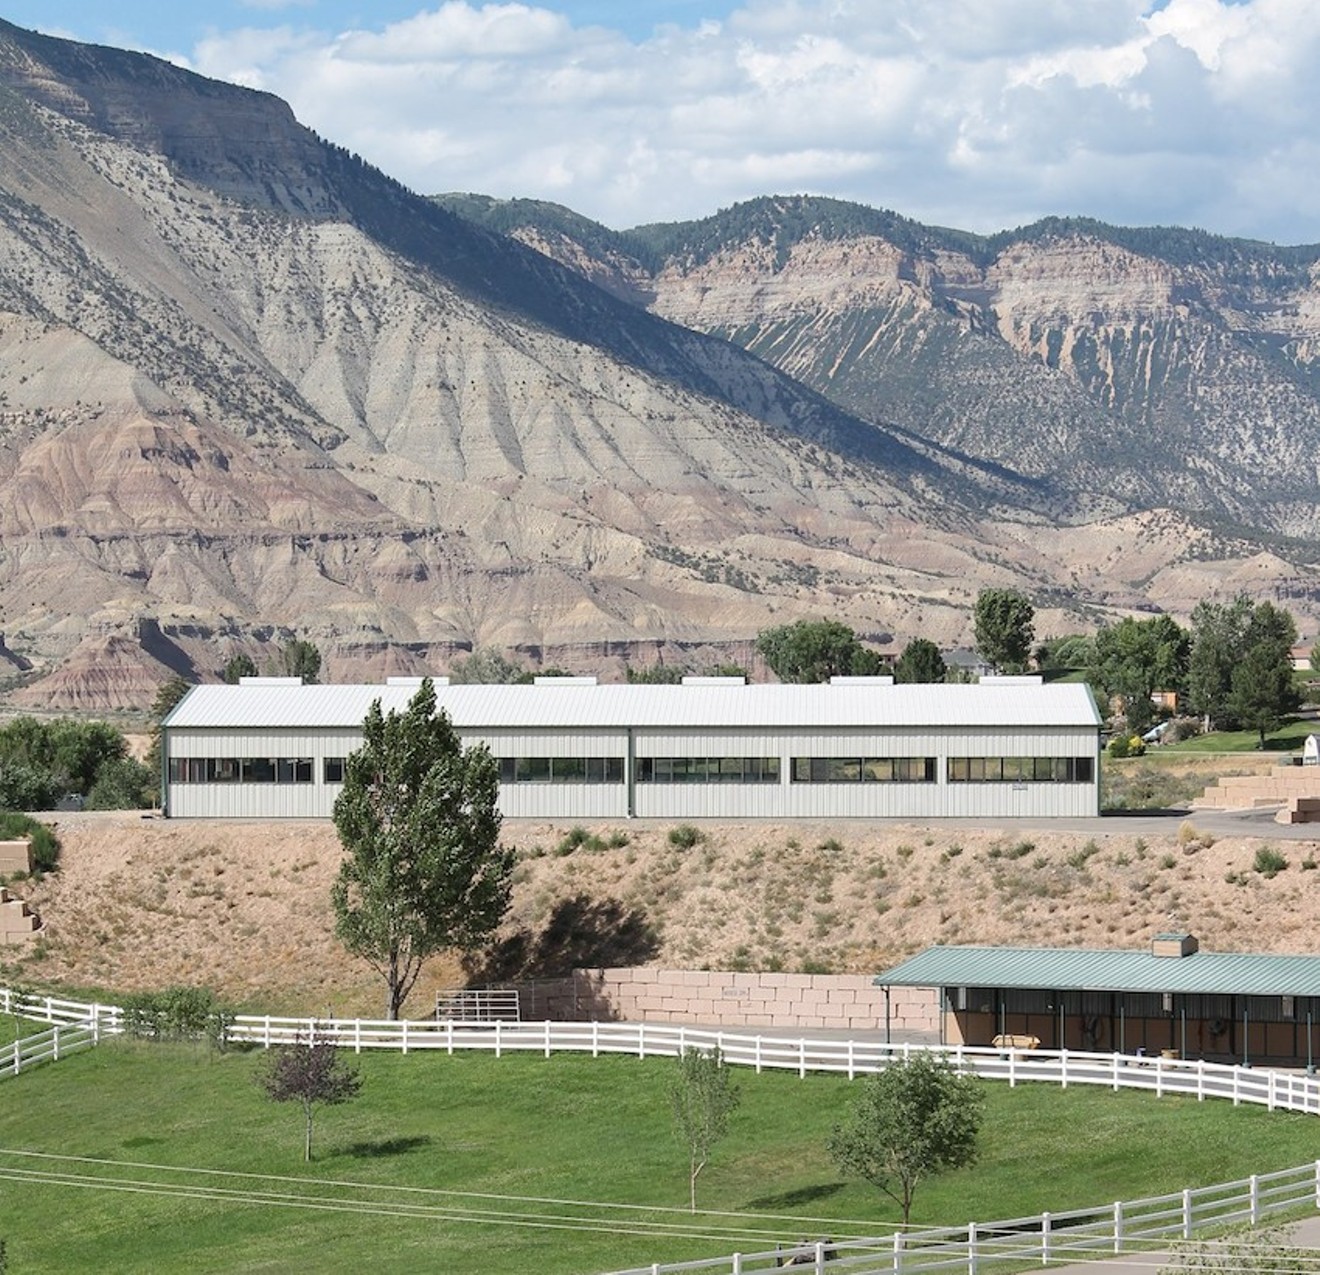 The Colorado Hemp Institute sits on a former horse-training facility.